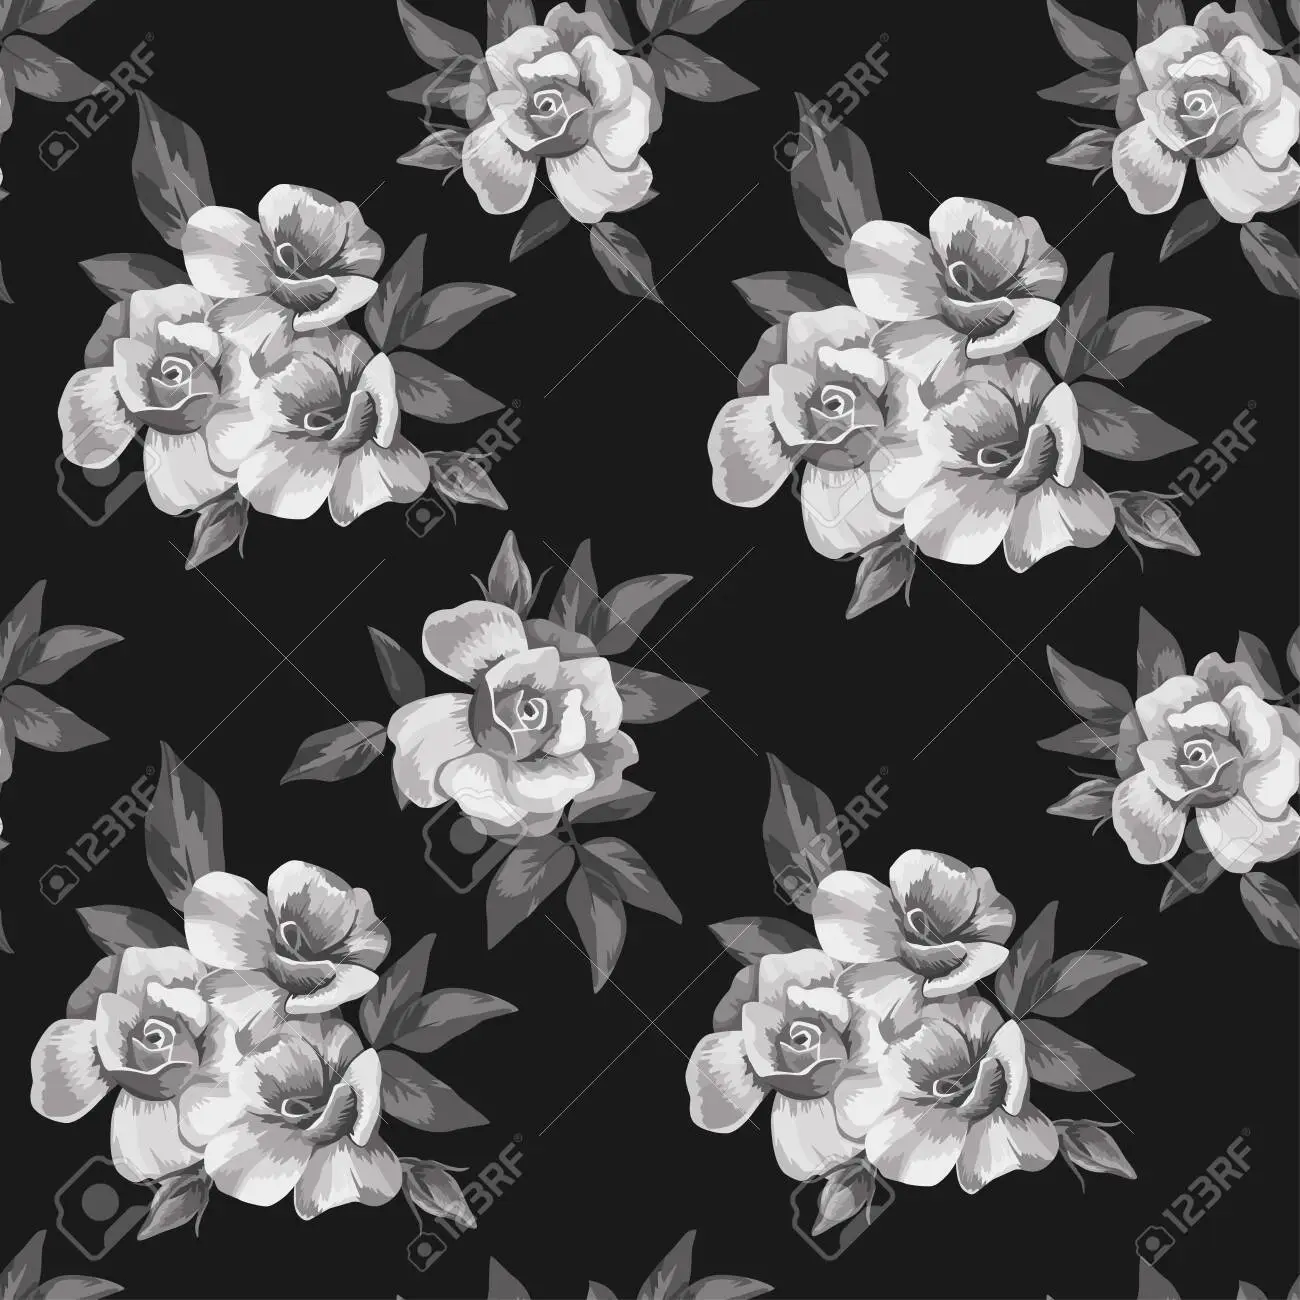 Creative black white seamless illustration rose flowers on the black background design fabric pattern trendy floral wallpaper royalty free svg cliparts vectors and stock illustration image